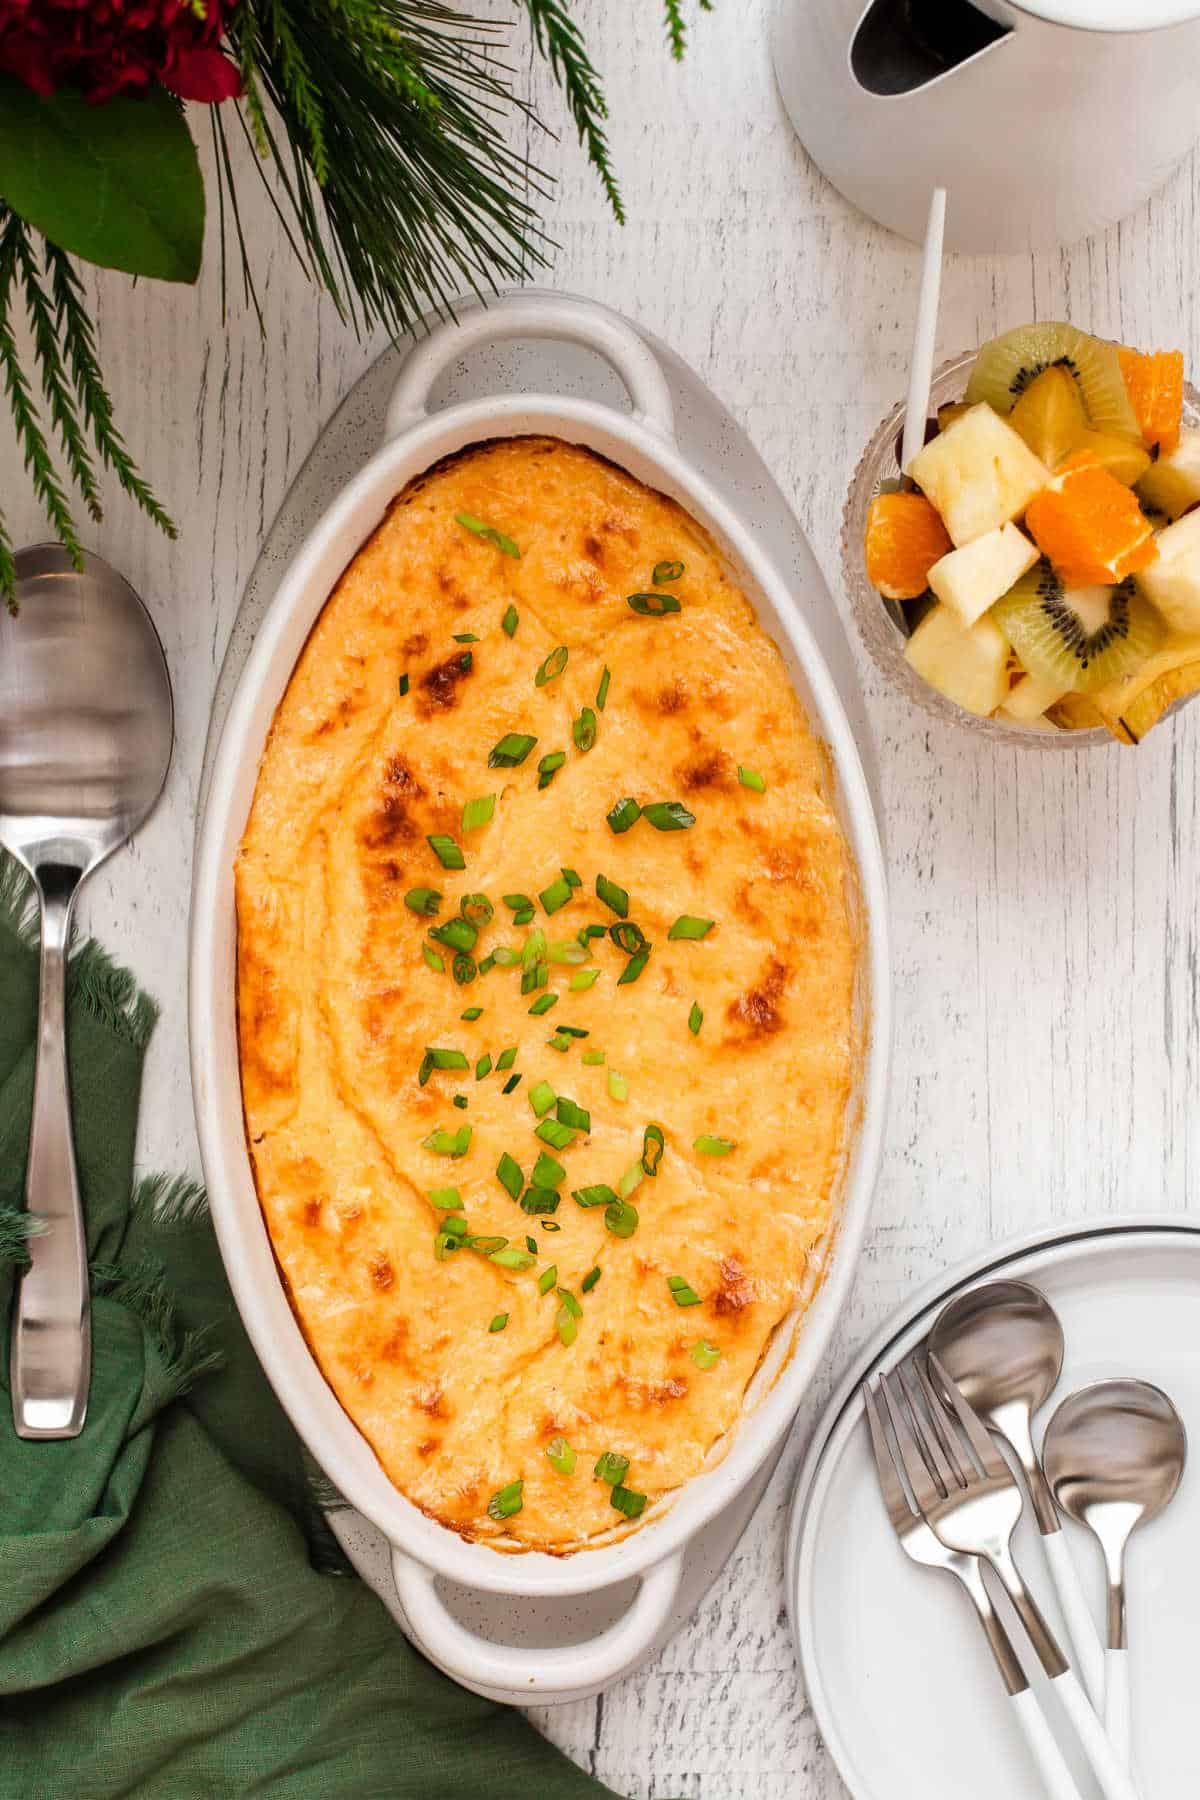 baked cheesy grits casserole on table with fruit and plates, overhead view.